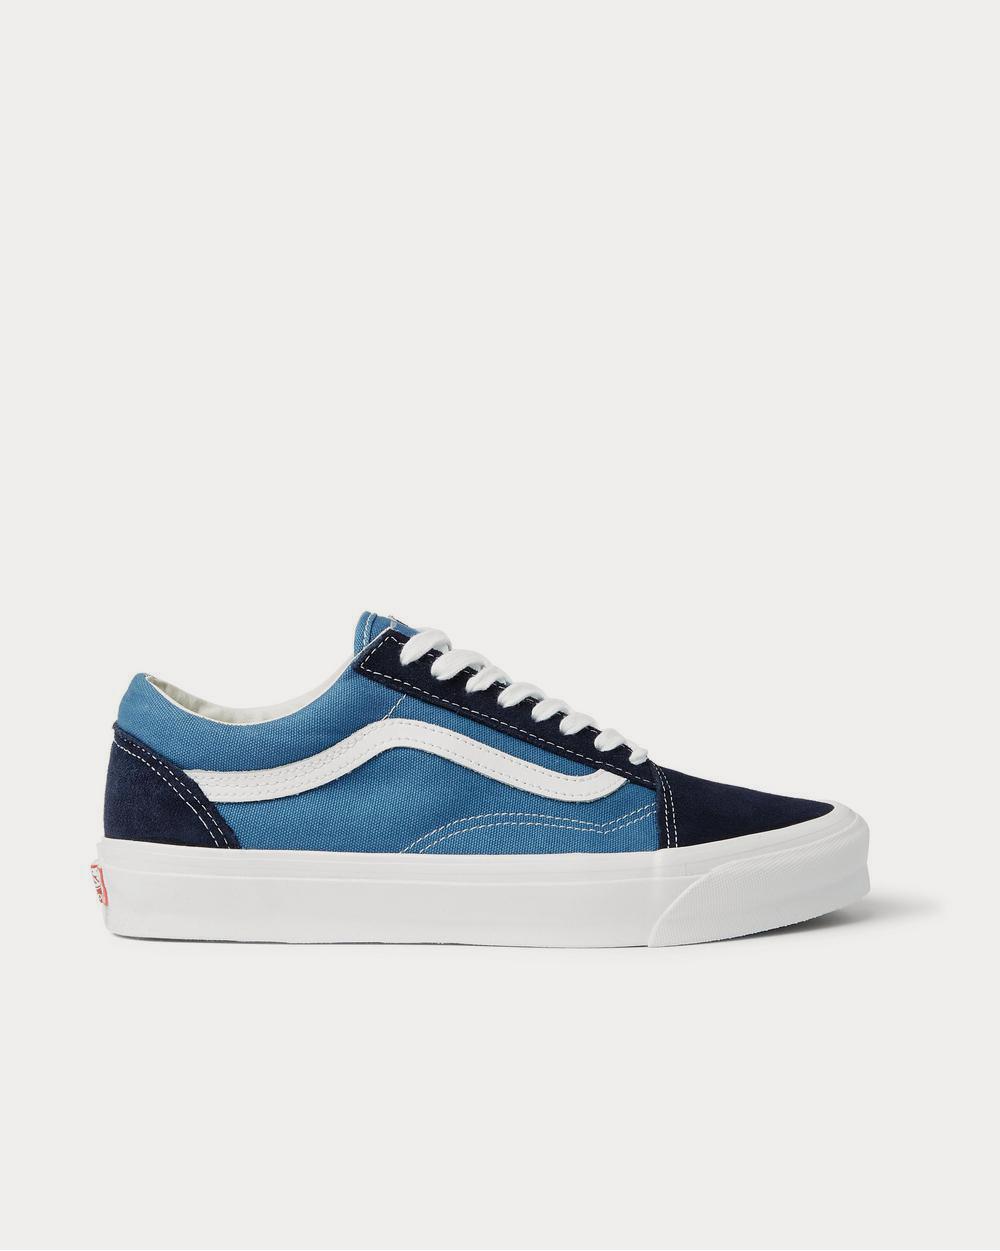 OG Old Skool LX Leather-Trimmed Suede and Canvas Blue low top sneakers